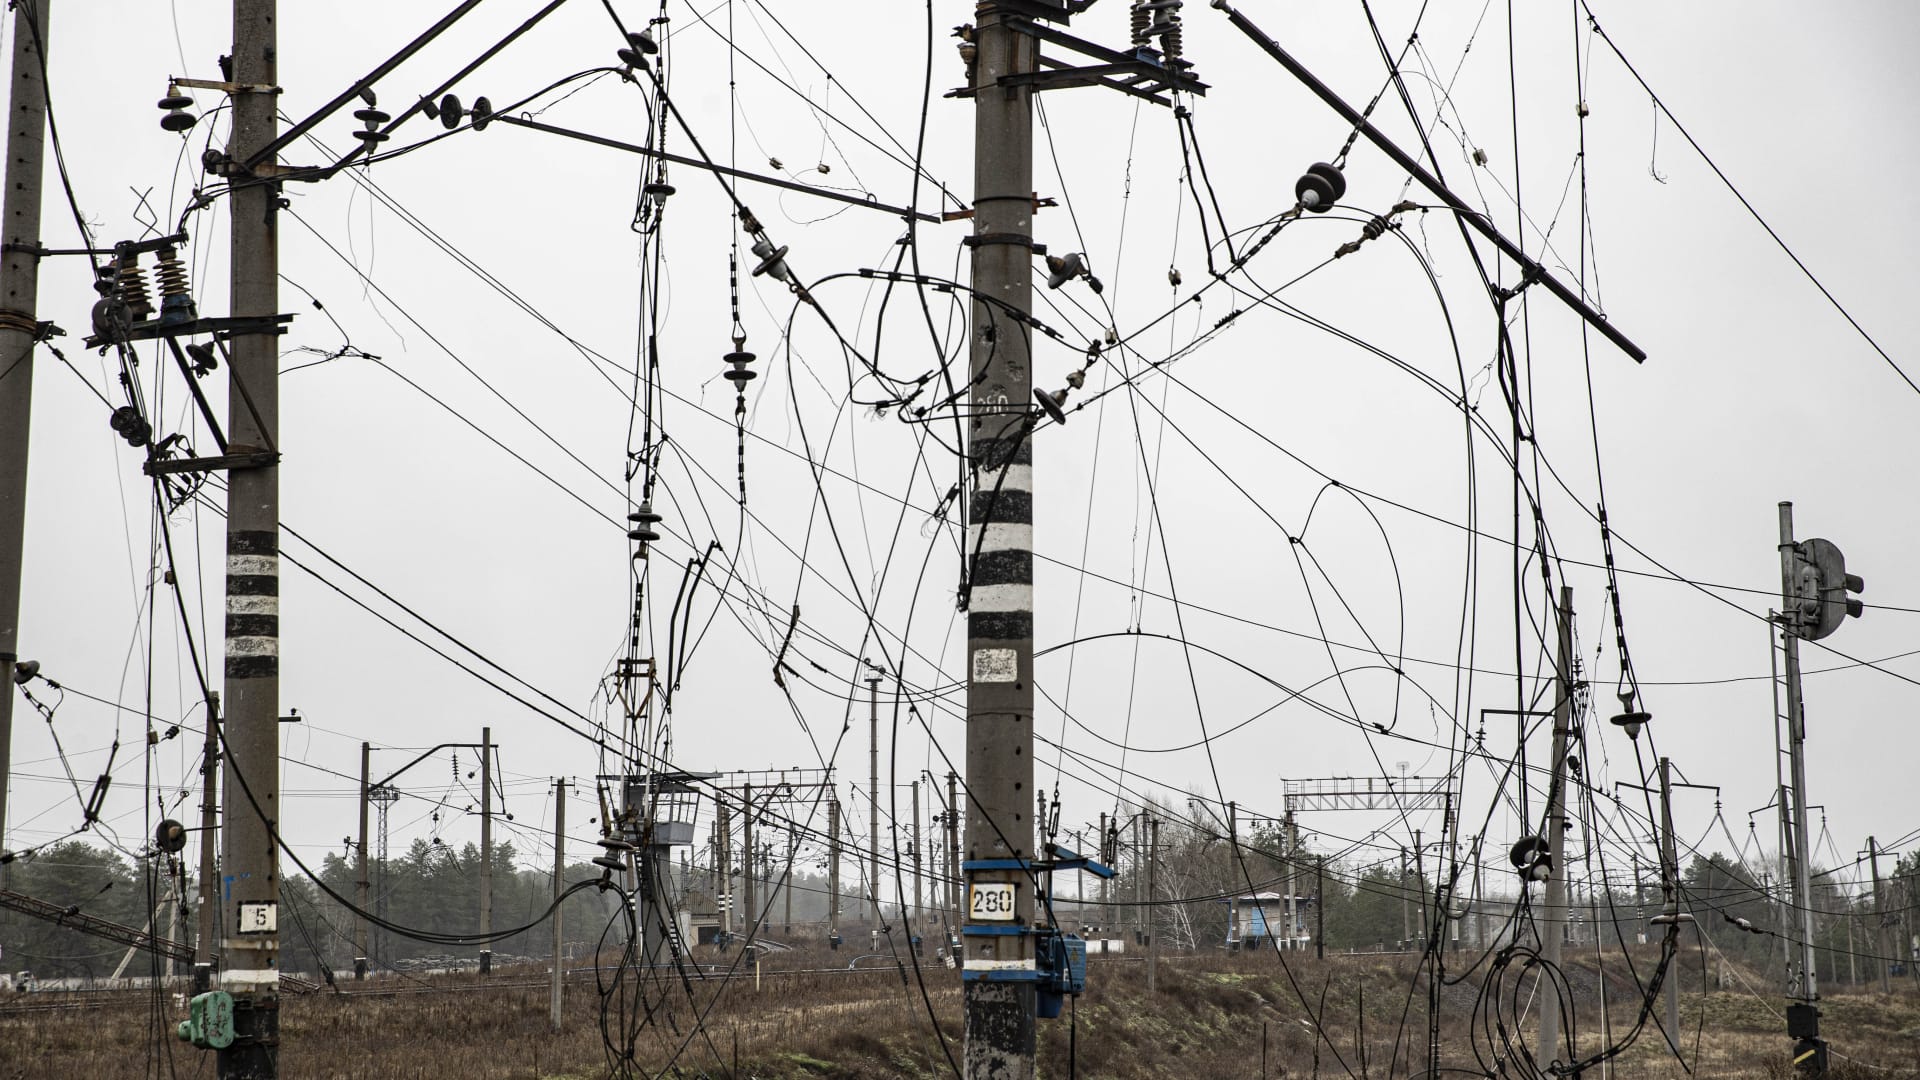 LYMAN, UKRAINE - NOVEMBER 27: A view of damaged electrical wires after Ukrainian army retaken control from the Russian forces in Lyman, Donetsk Oblast, Ukraine on November 27, 2022.